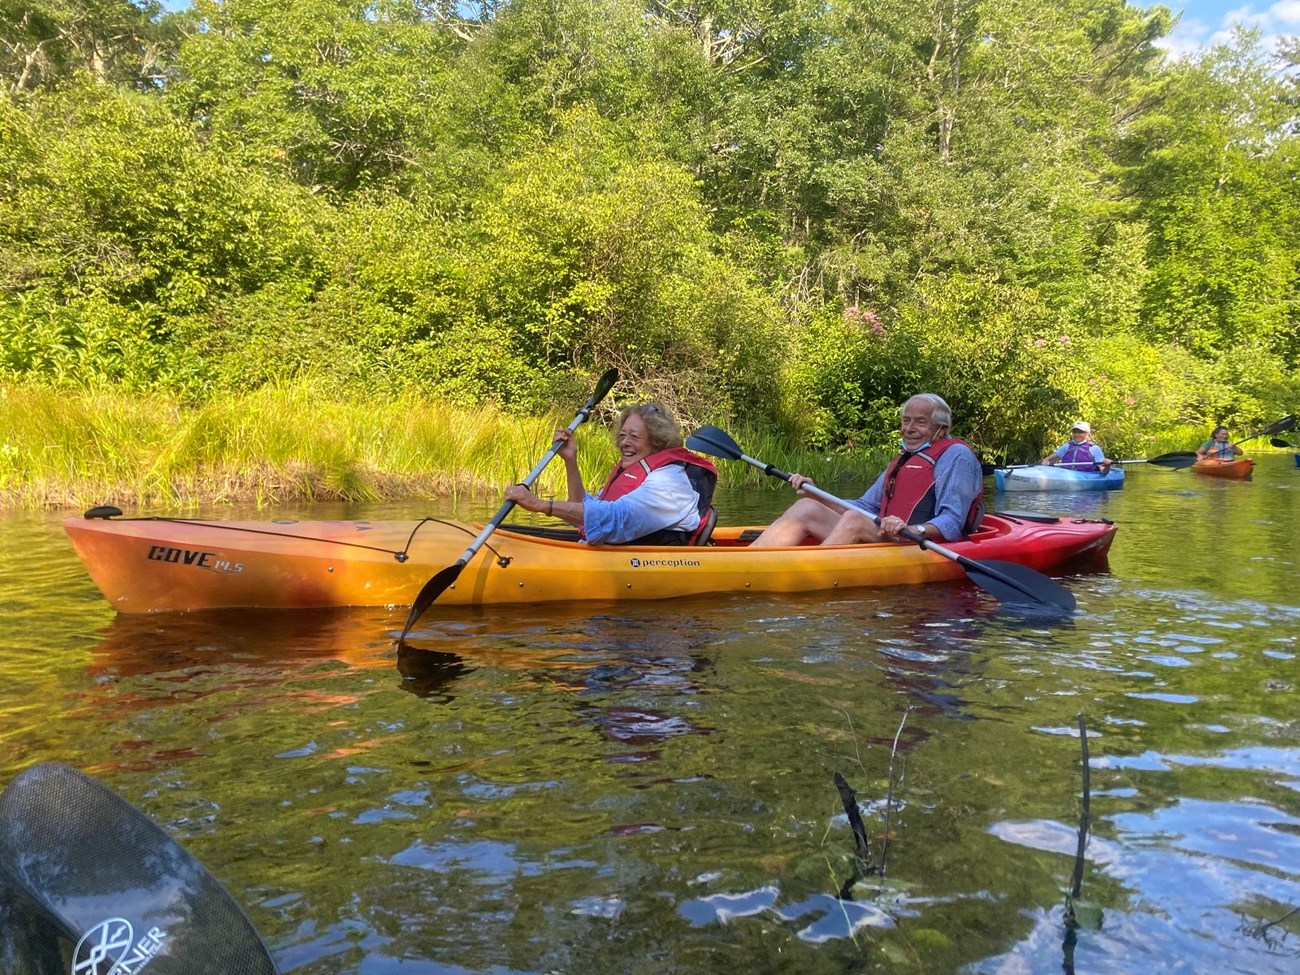 Stewardship Council and WPWA board members paddling the upper Wood River, Hopkinton, RI.  Council Town Representative and his wife share the tandem kayak above. Photo by Patricia Lardner.